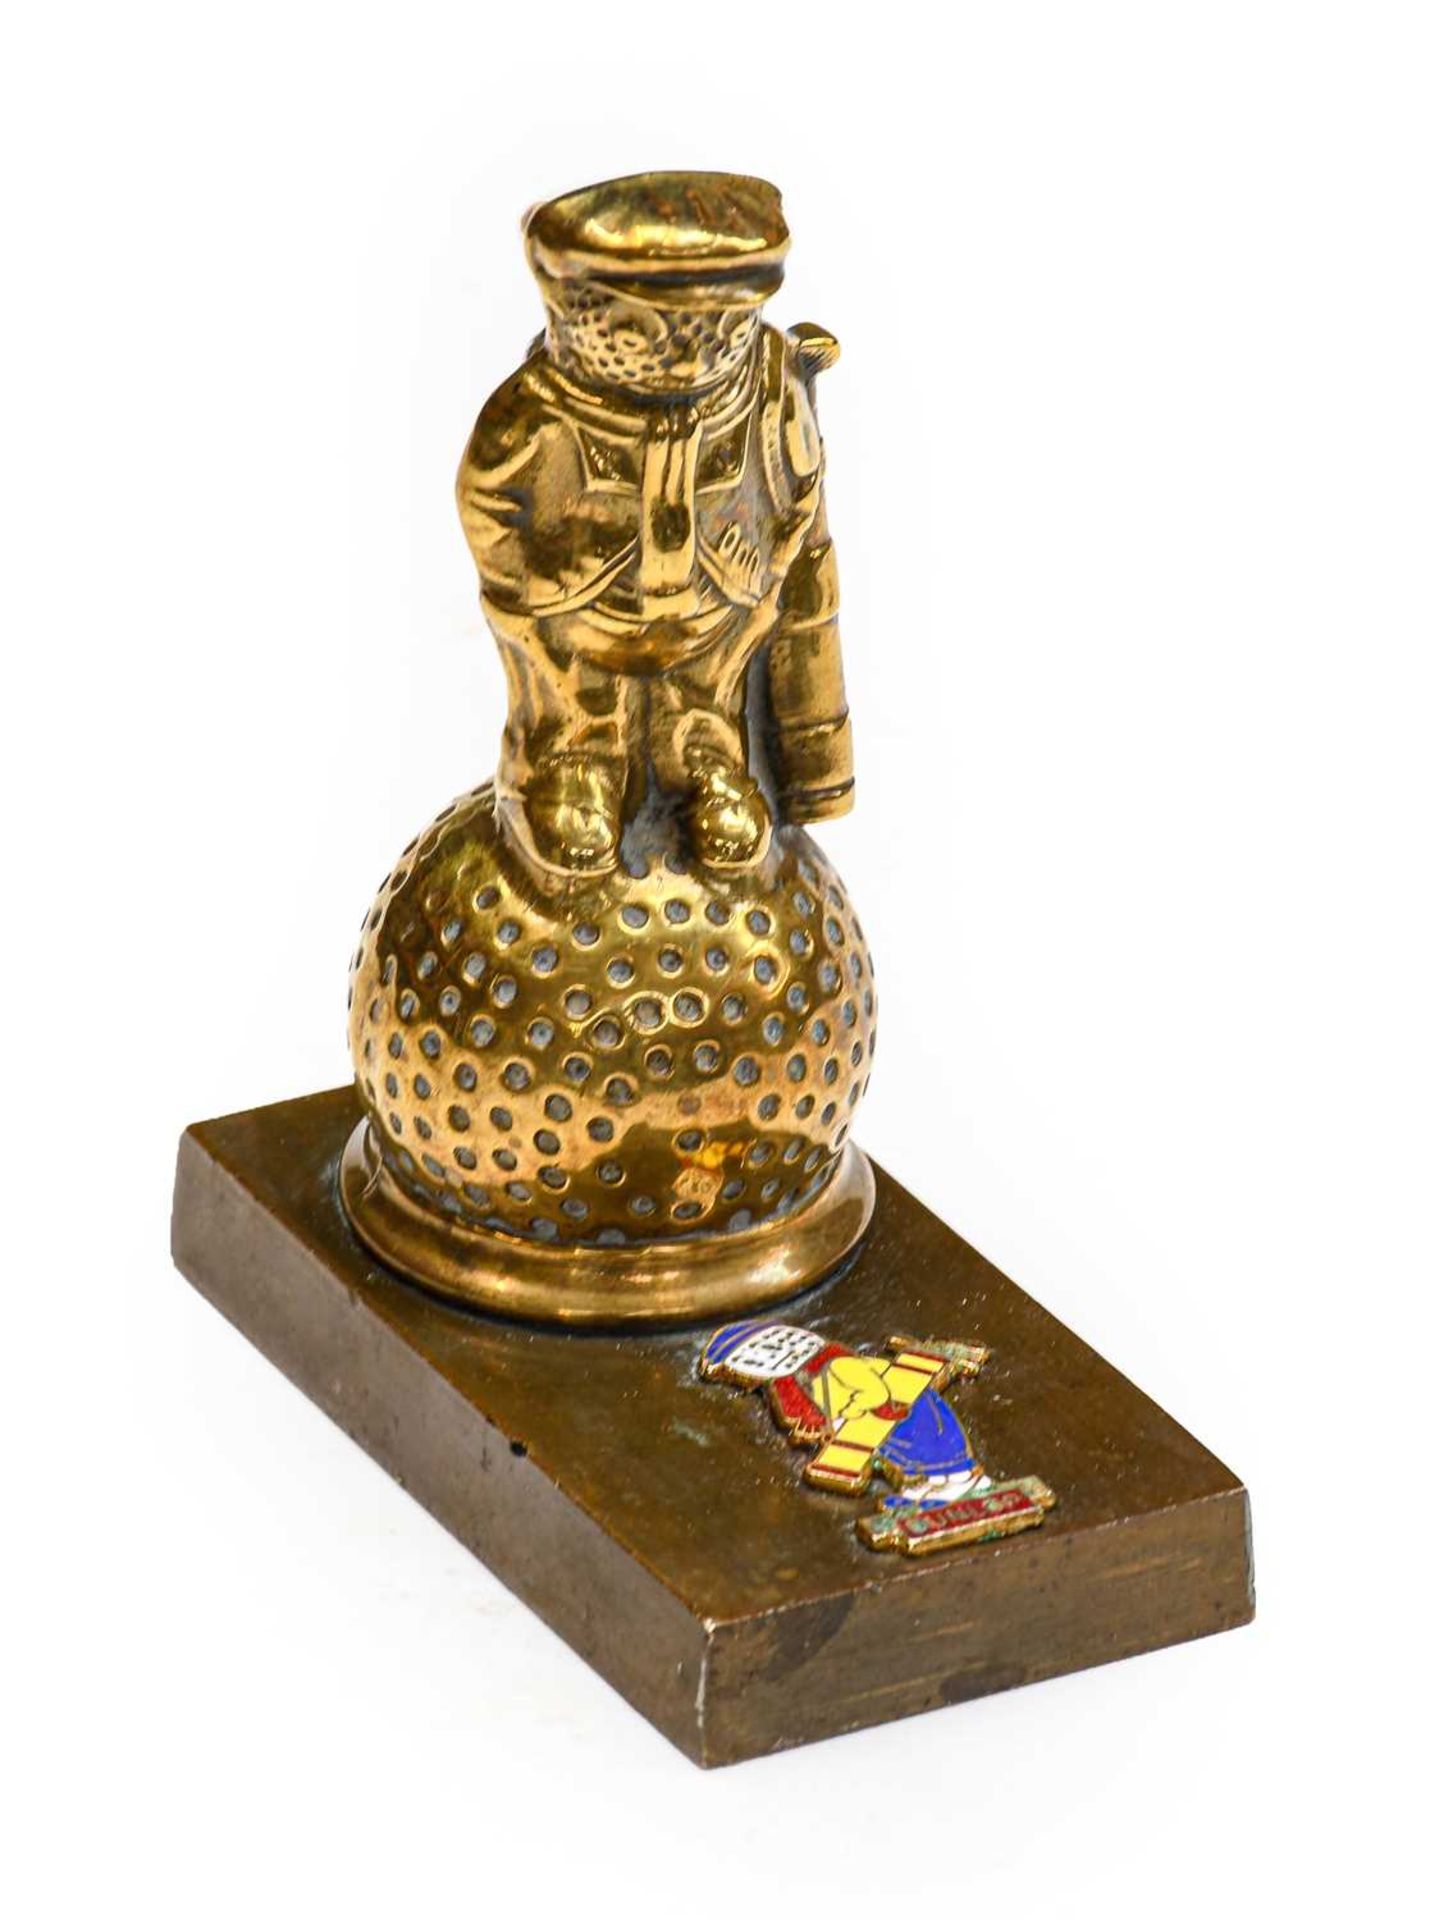 A Solid Brass Golfer Car Radiator Mascot, mounted on a rectangular base with enamelled Dunlop